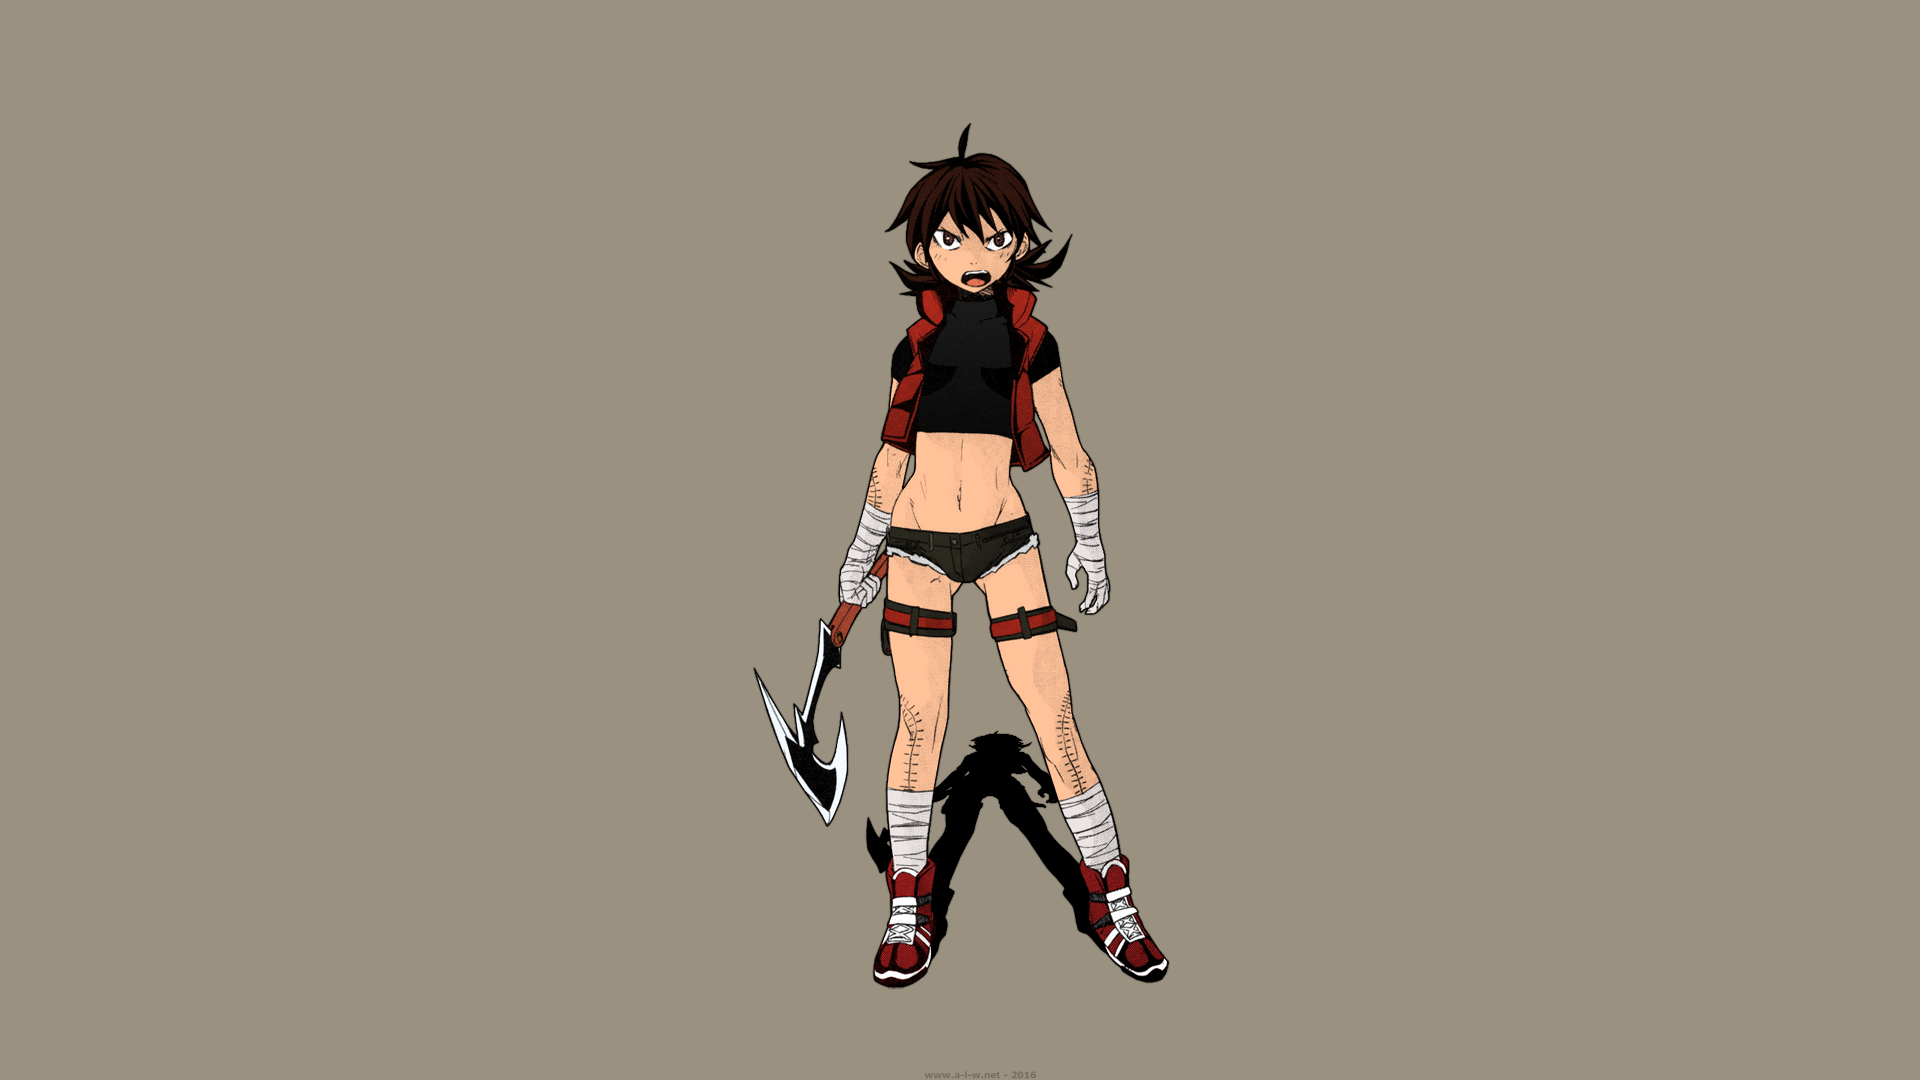 Anime 1920x1080 Trash. D.P Shirato Marin short hair brunette short pants tomboys scars bandages weapon axes anime manga anime girls short shorts belly women angry pants slim body open mouth girls with guns standing